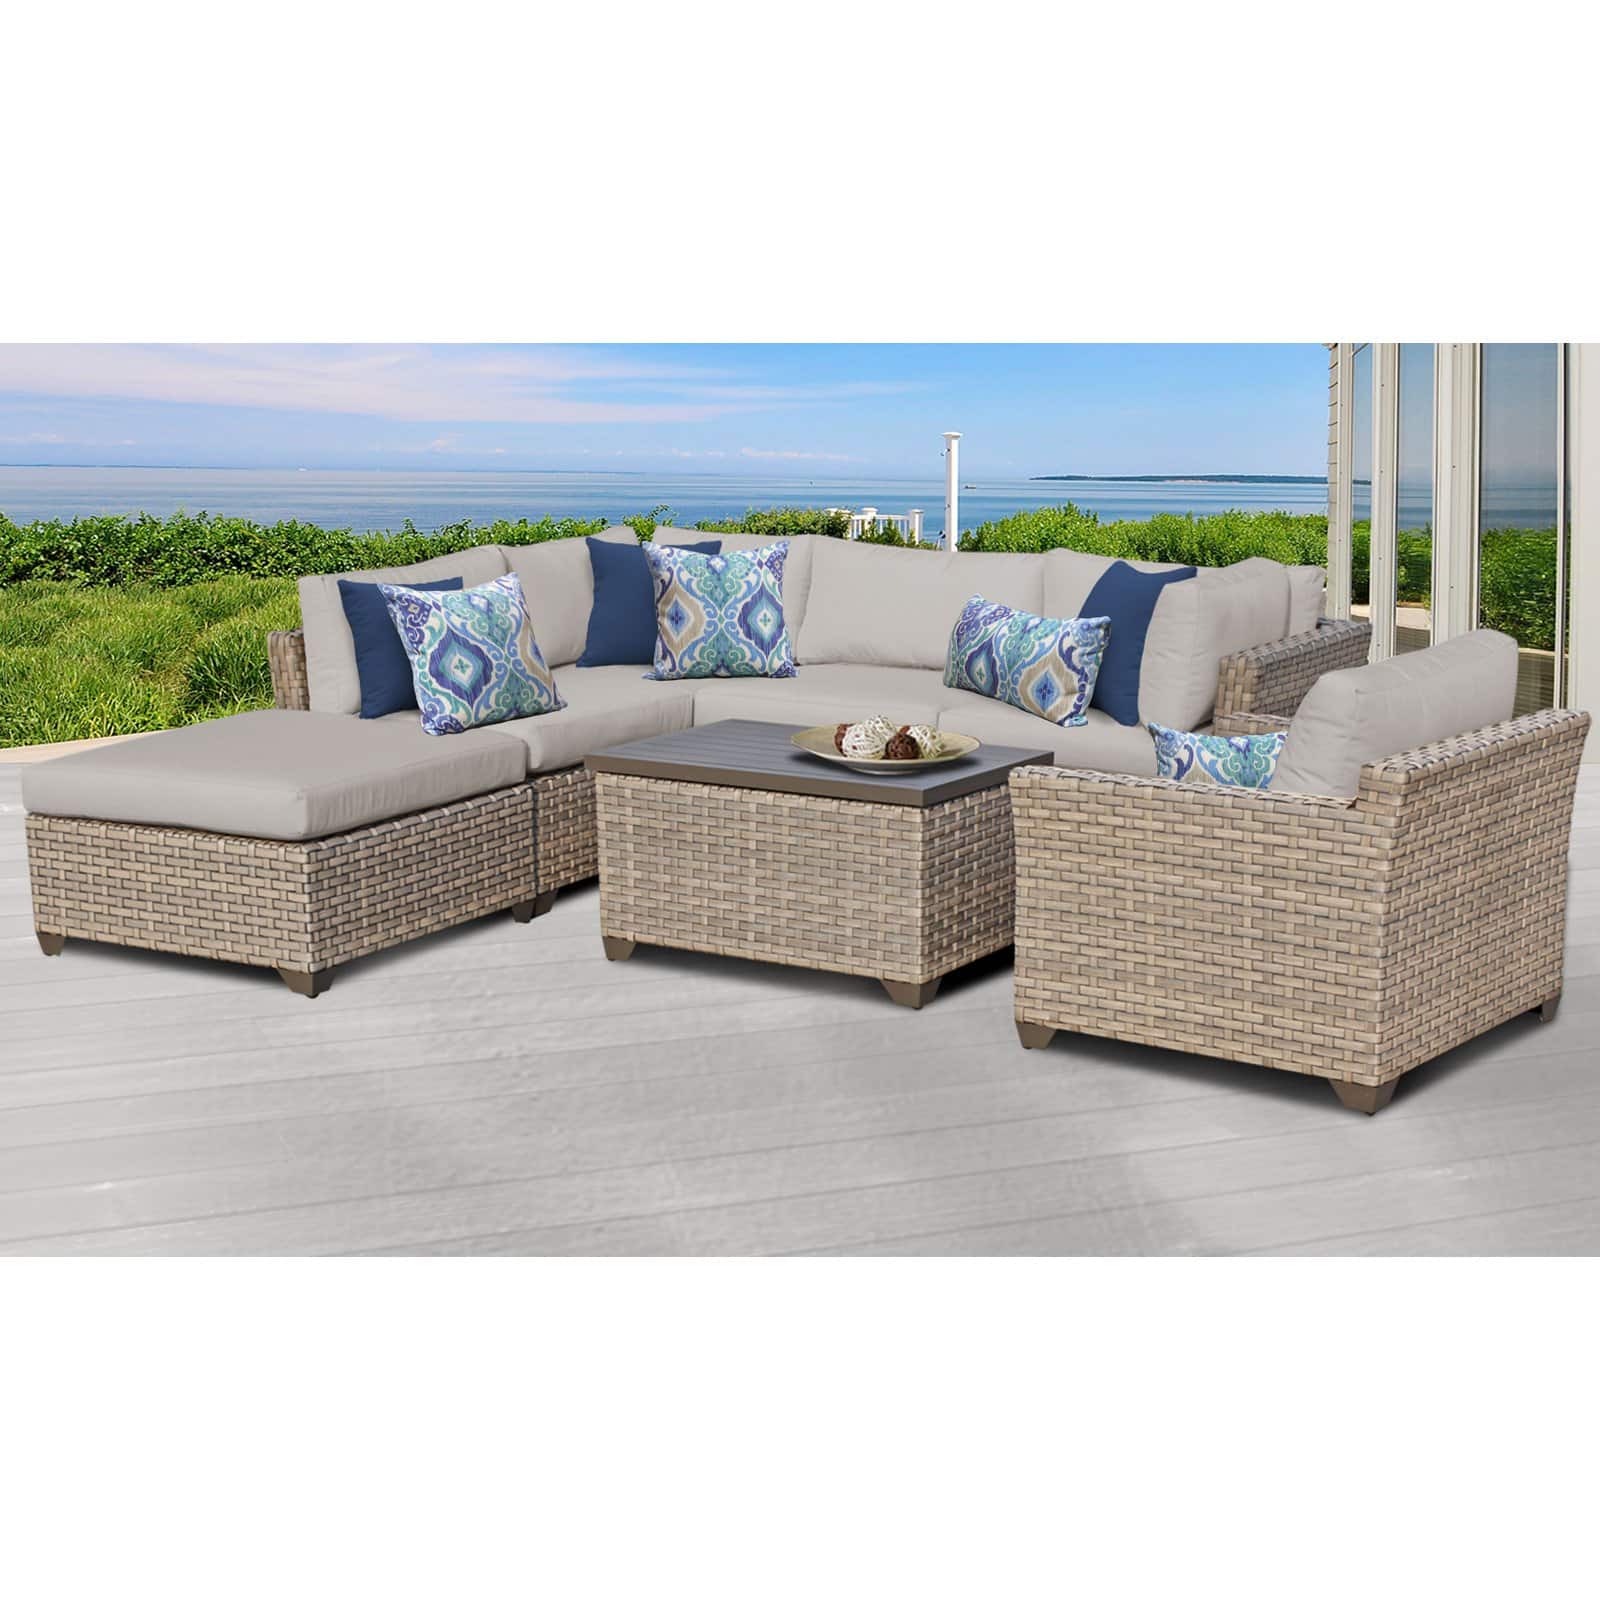 TK Classics Monterey Wicker 7 Piece Patio Conversation Set with Coffee Table and 2 Sets of Cushion Covers - image 3 of 5